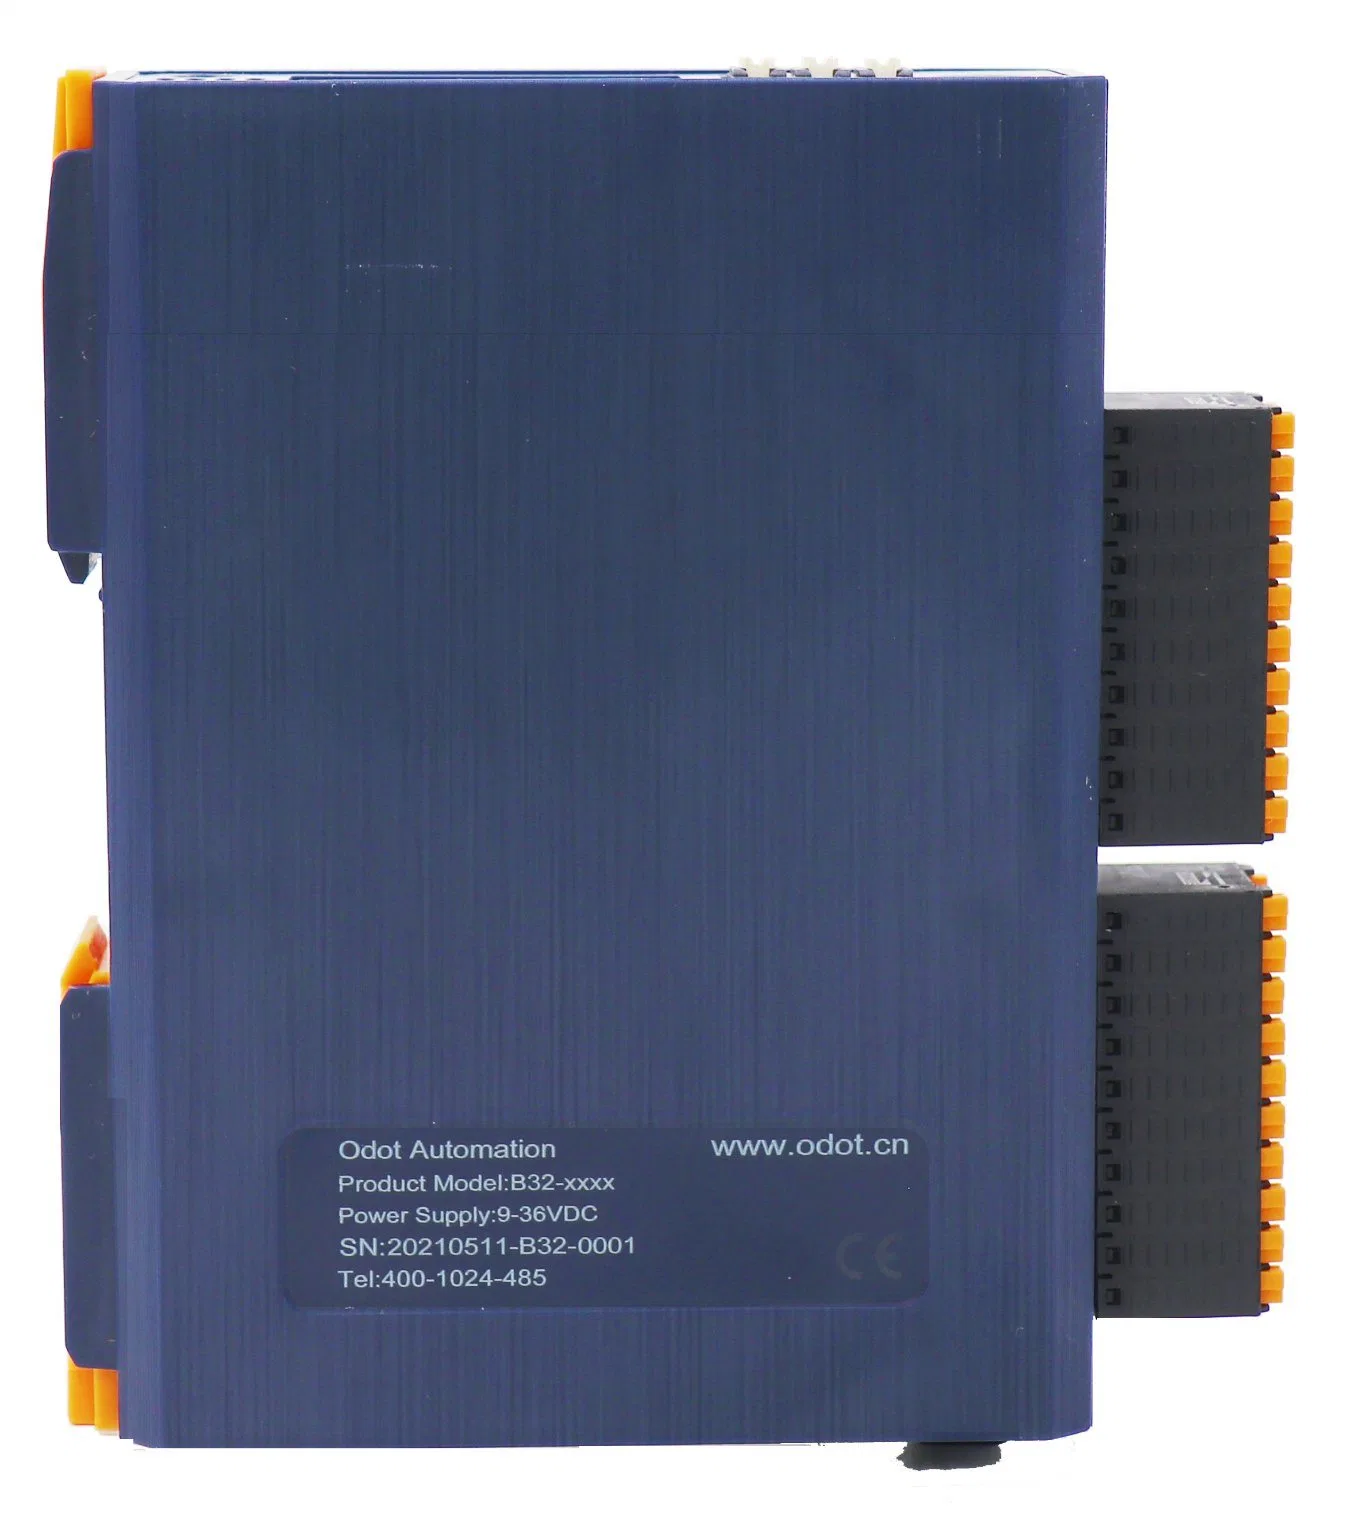 Ethernet/IP Protocol for Integrated Io Module System, 2-4 Io Slots, Spring Terminals, Dual Ethernet Port, LED Screen, 24VDC